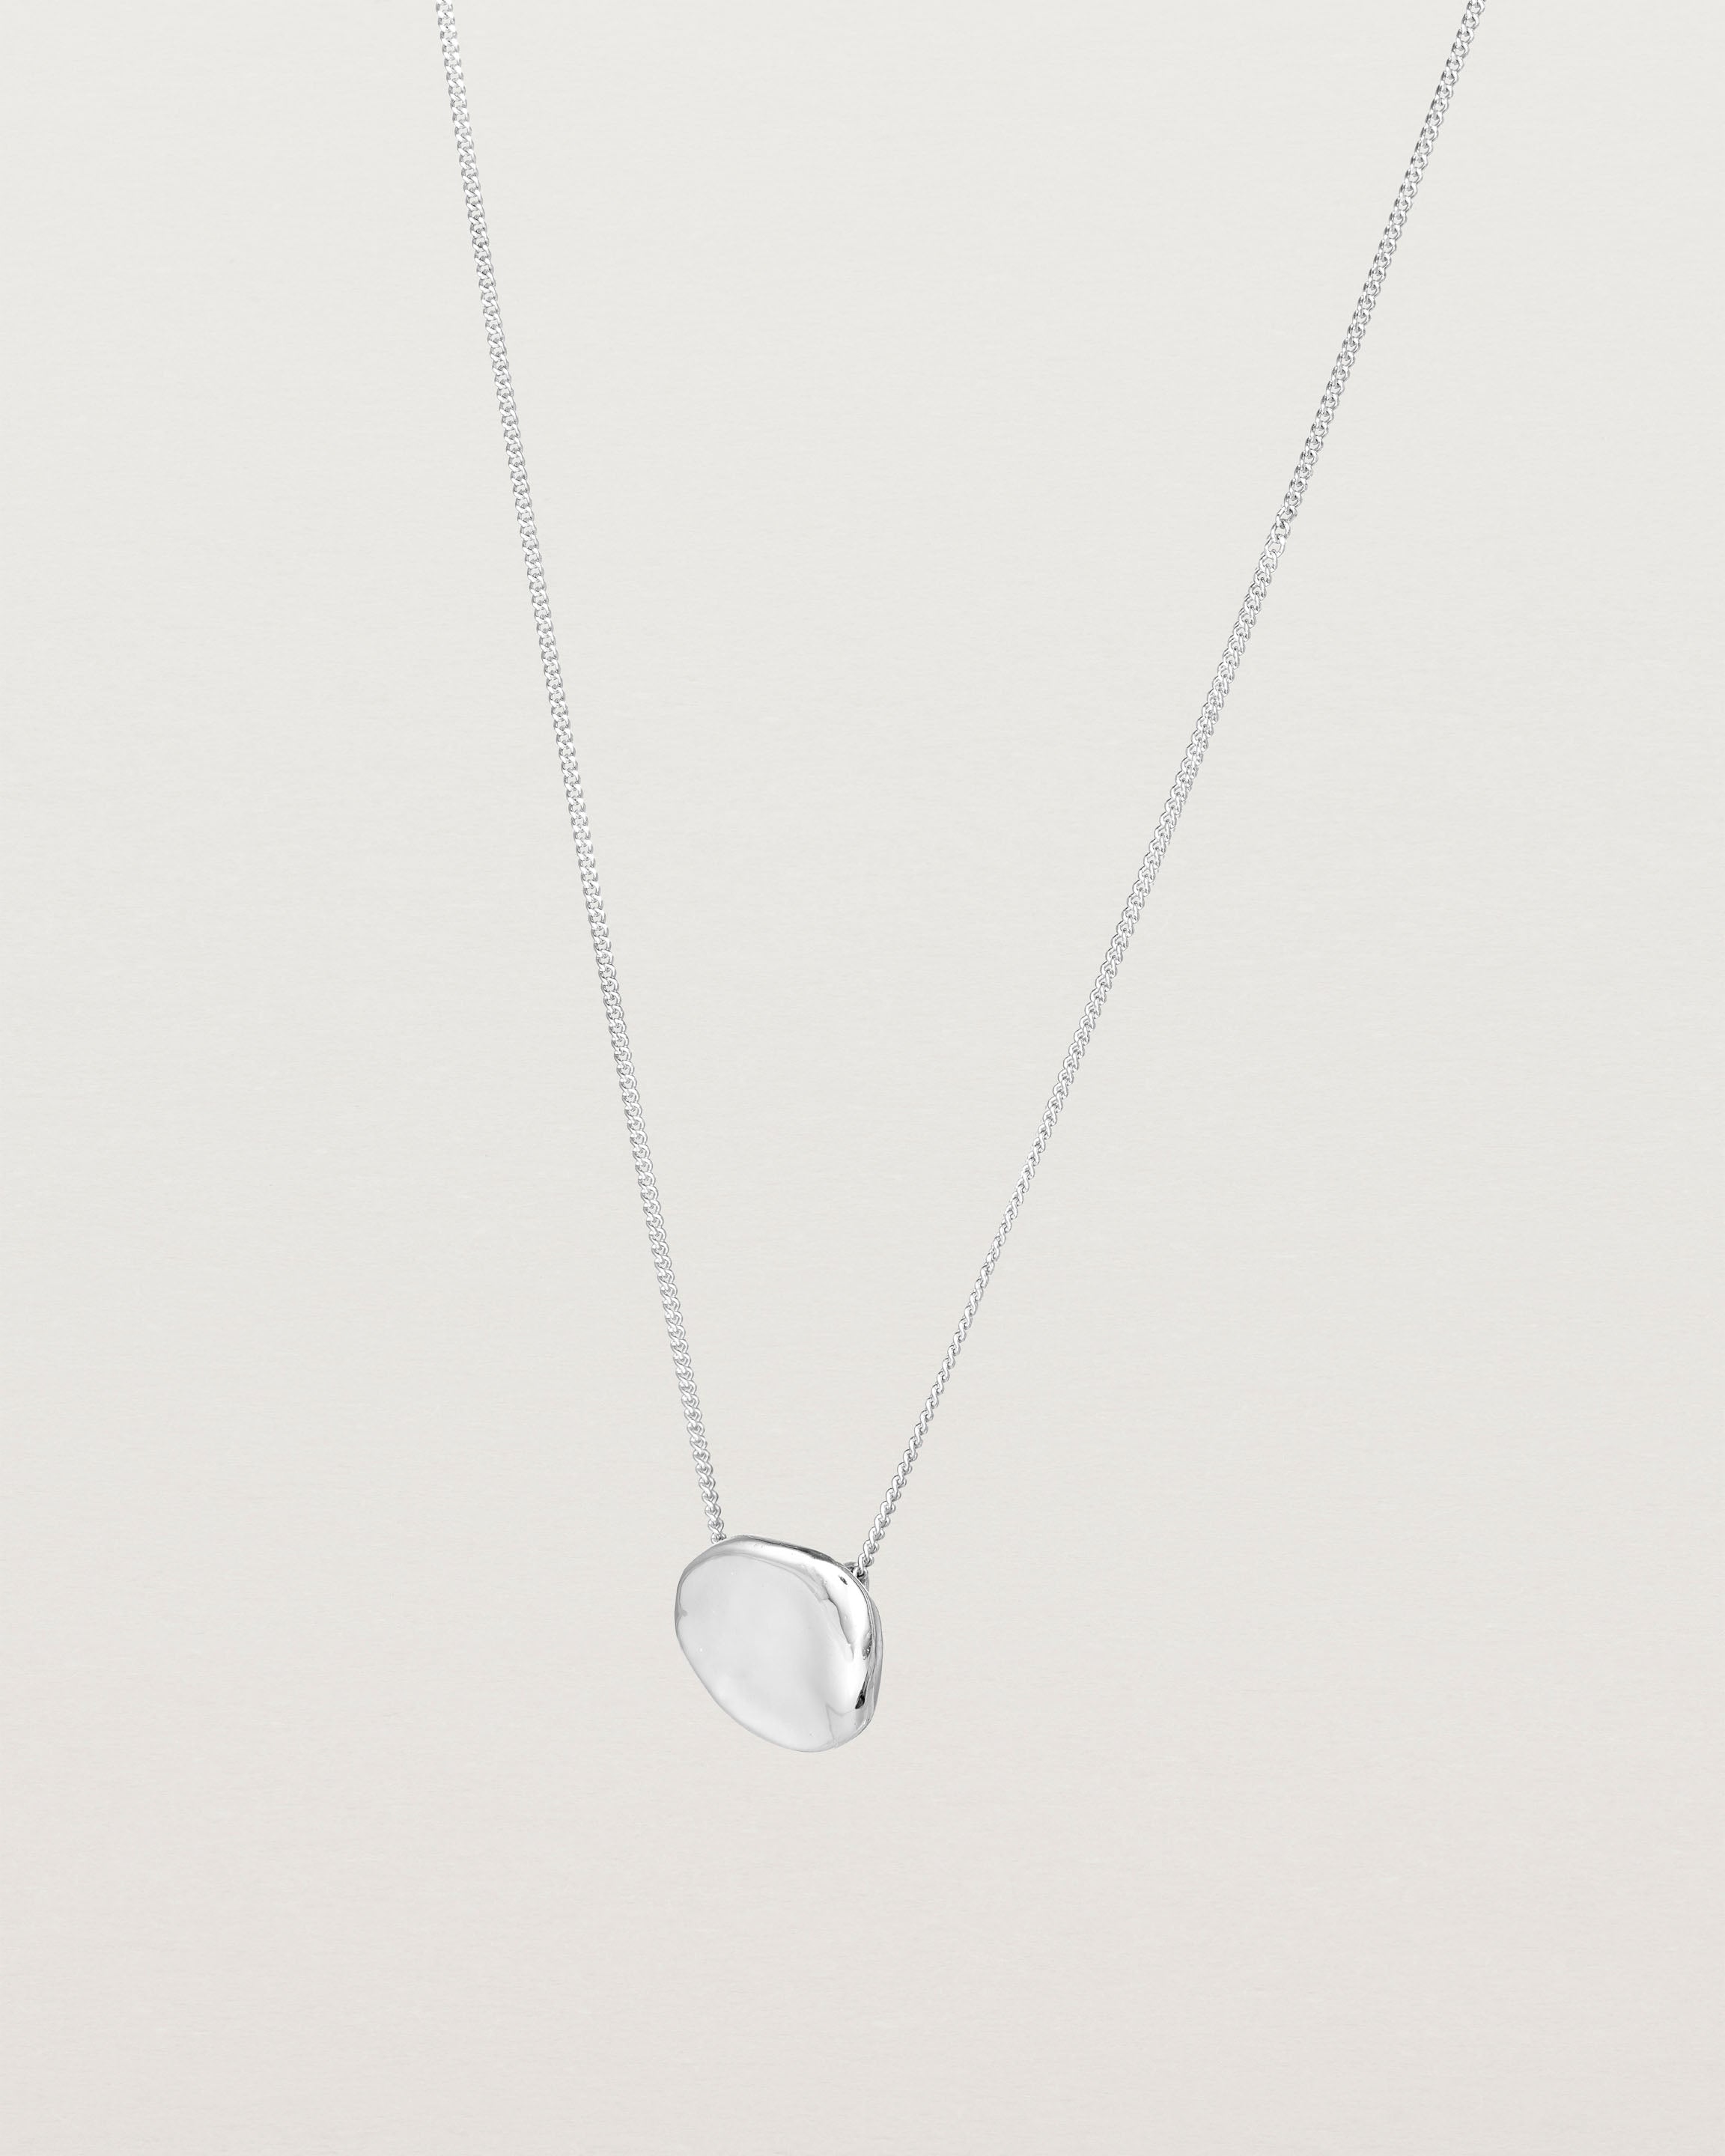 Angled view of the Petite Mana Necklace in sterling silver.